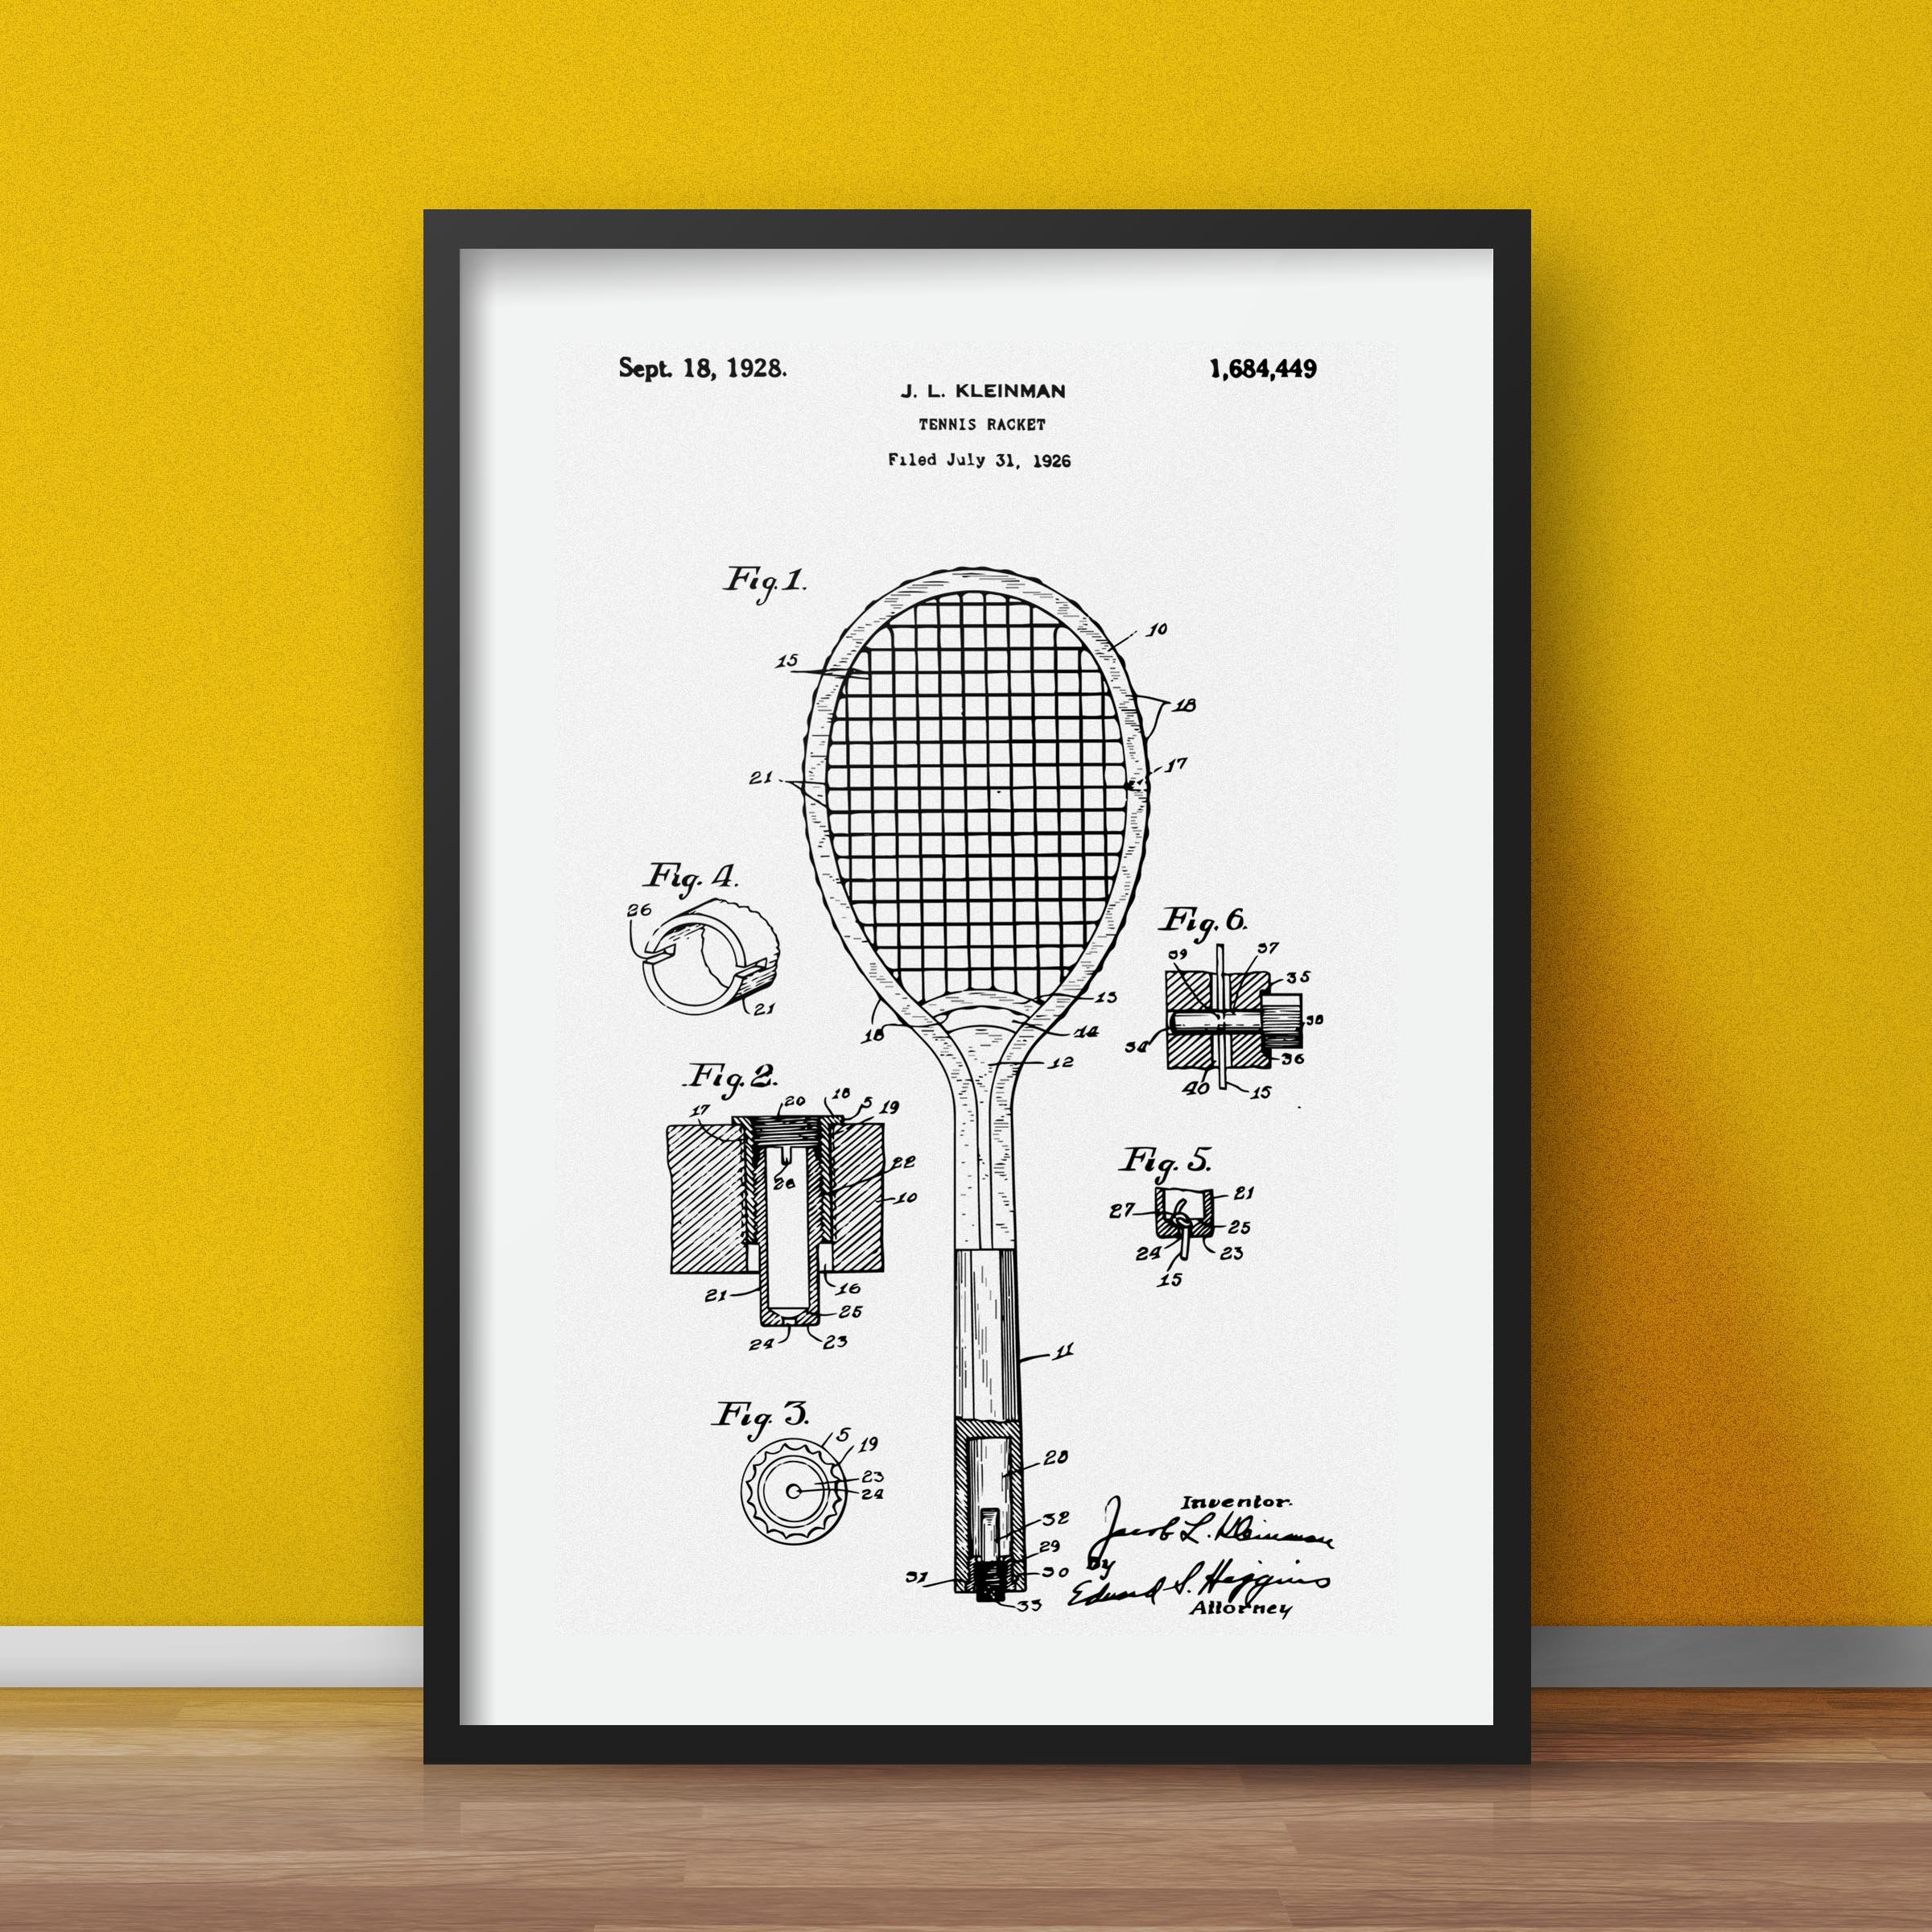 Creative poster with tennis racket.